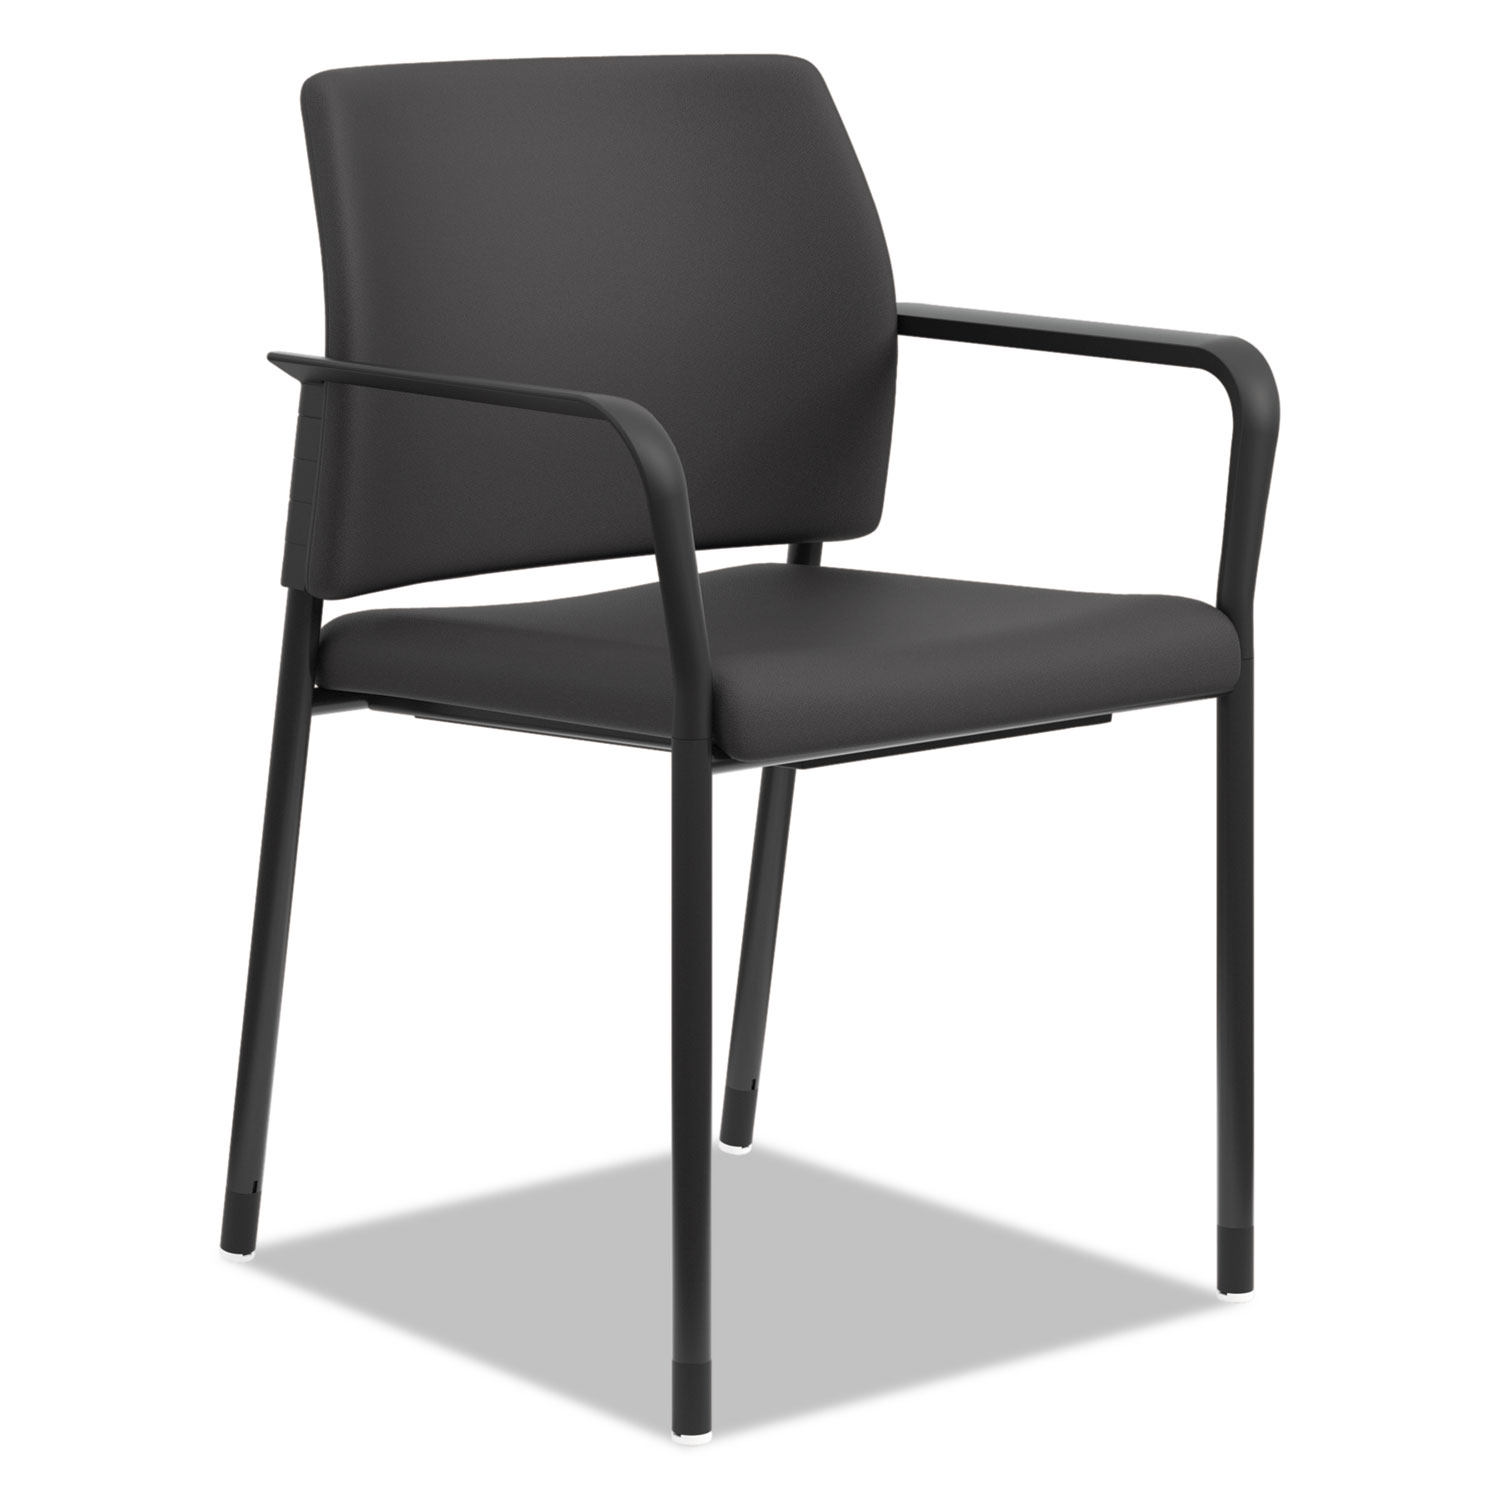 Accommodate™ Series Guest Chair with Fixed Arms, Black Fabric